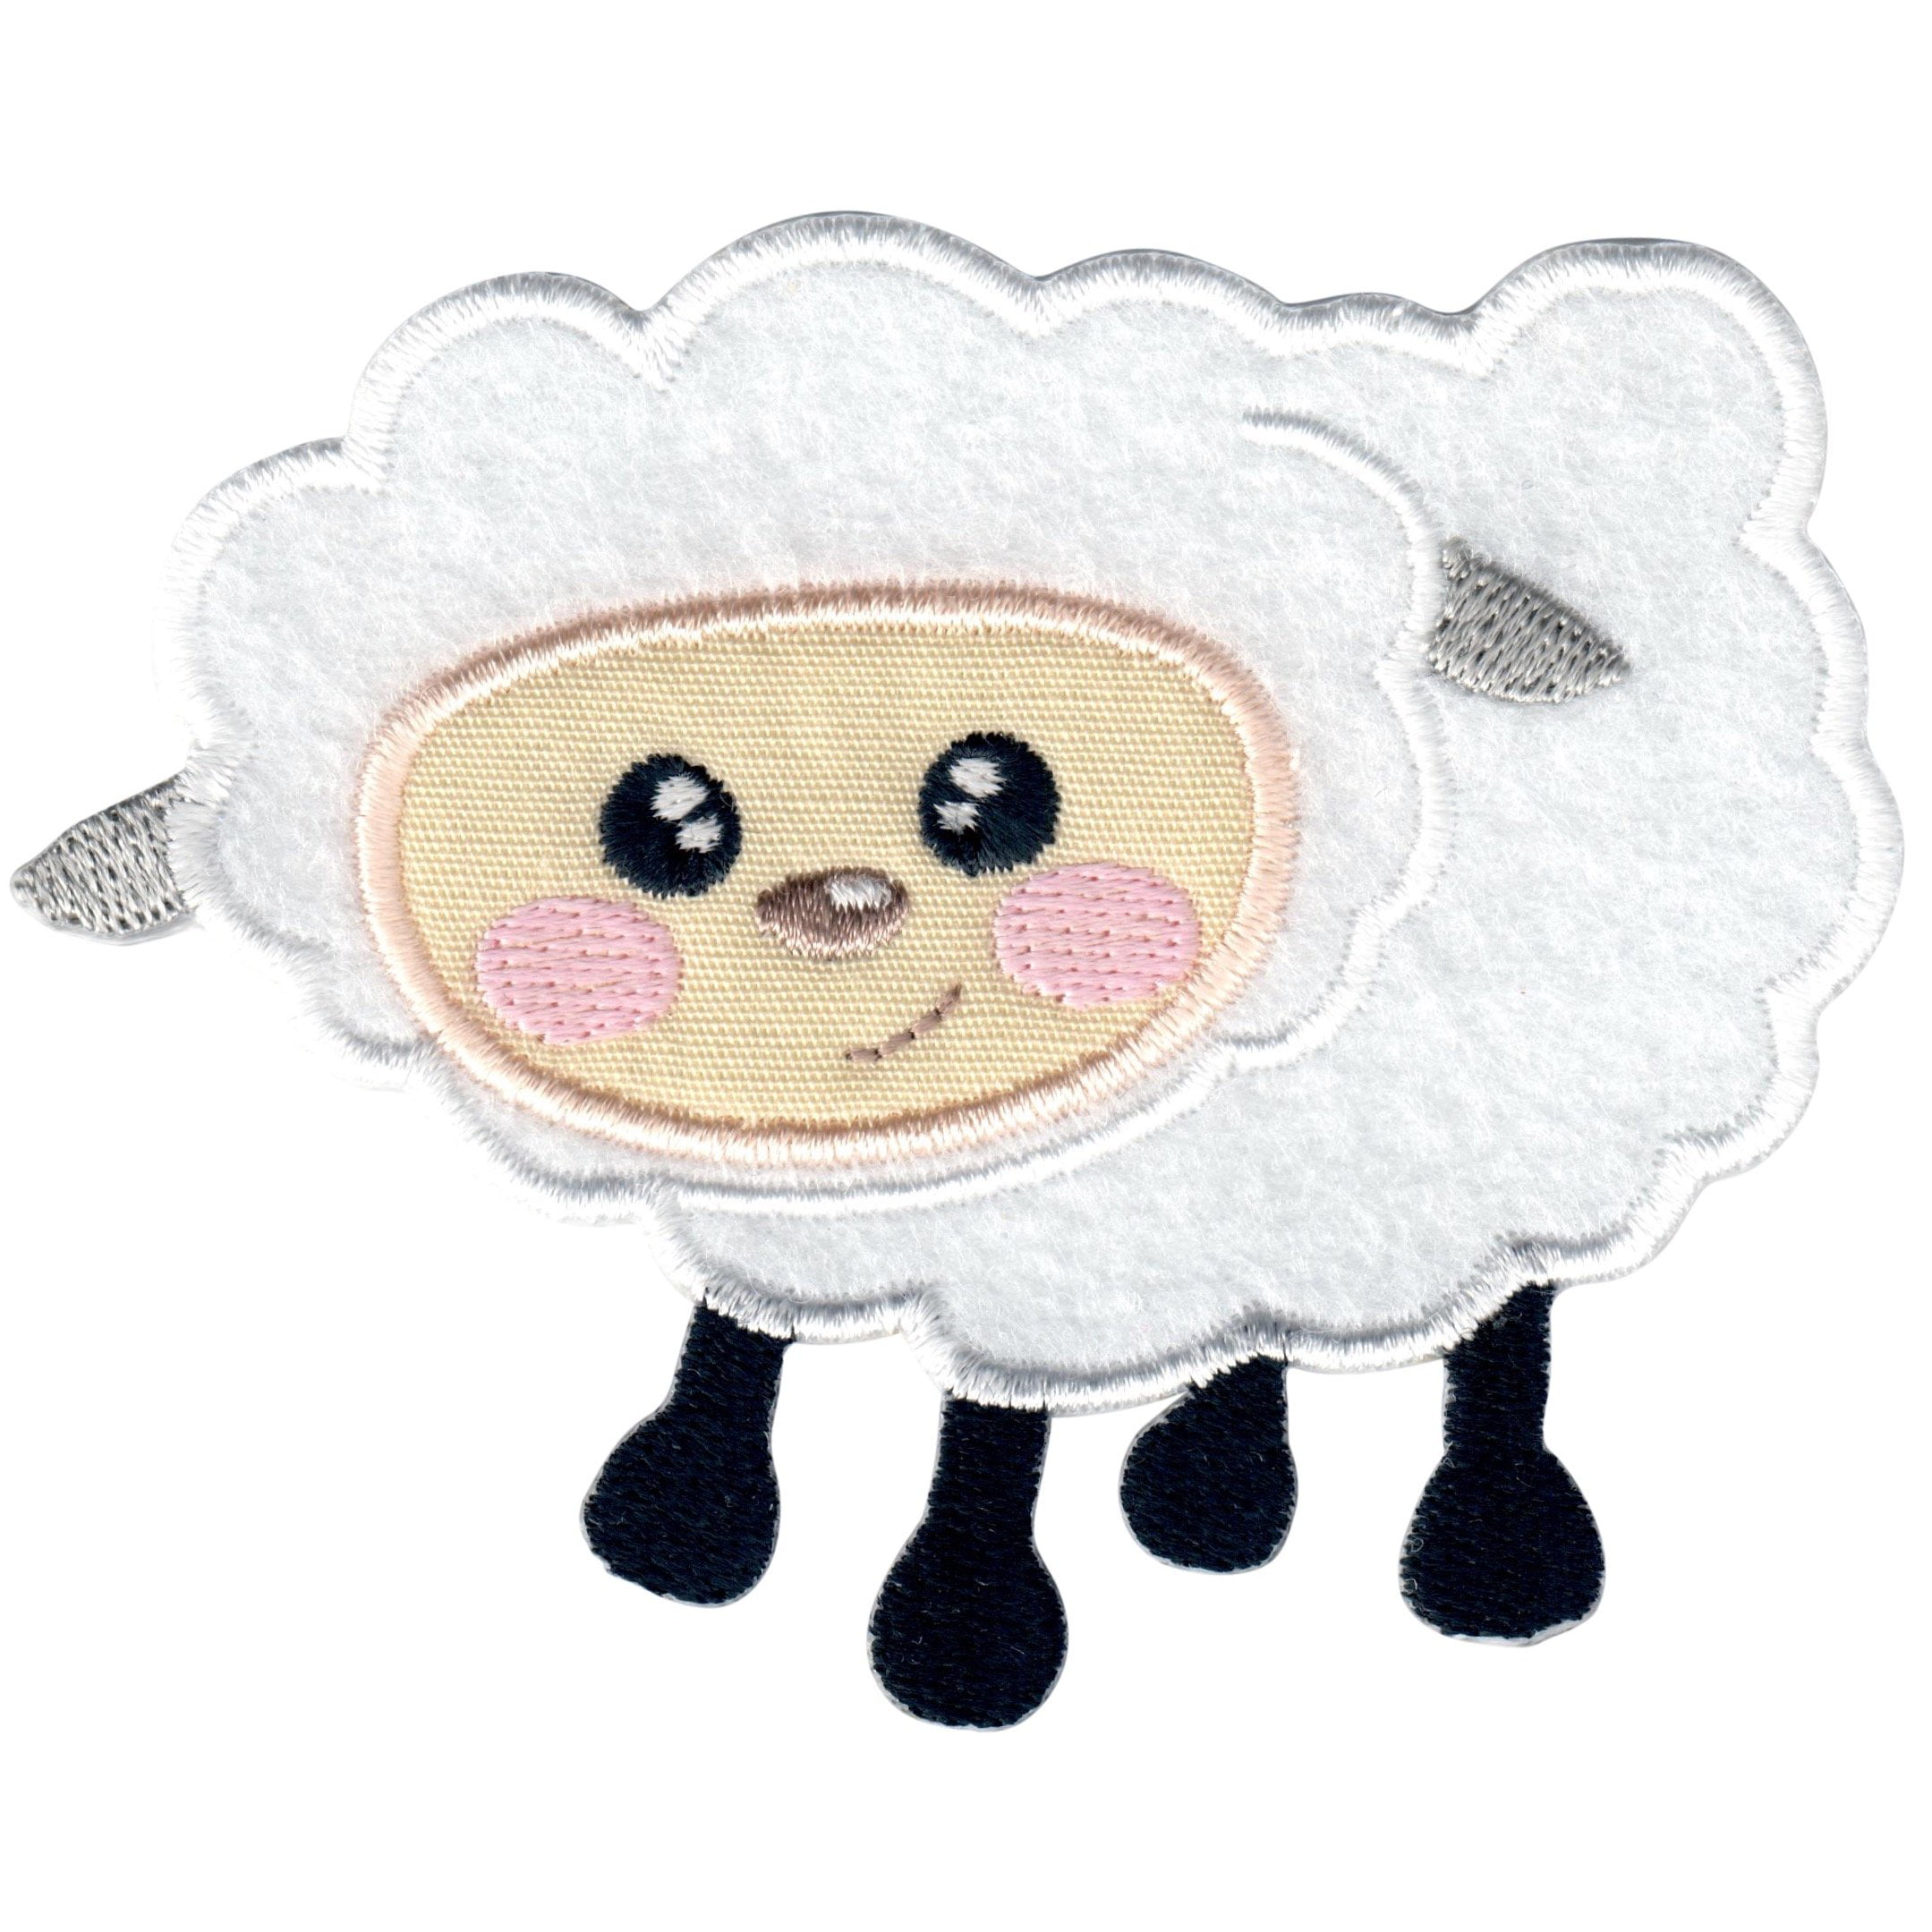 Craft Supply Cute Kawaii Patch Sew On Patch Fluffy Little Lamb with a Bell Iron On Patch DIY Patches 11 Embroidery Patch